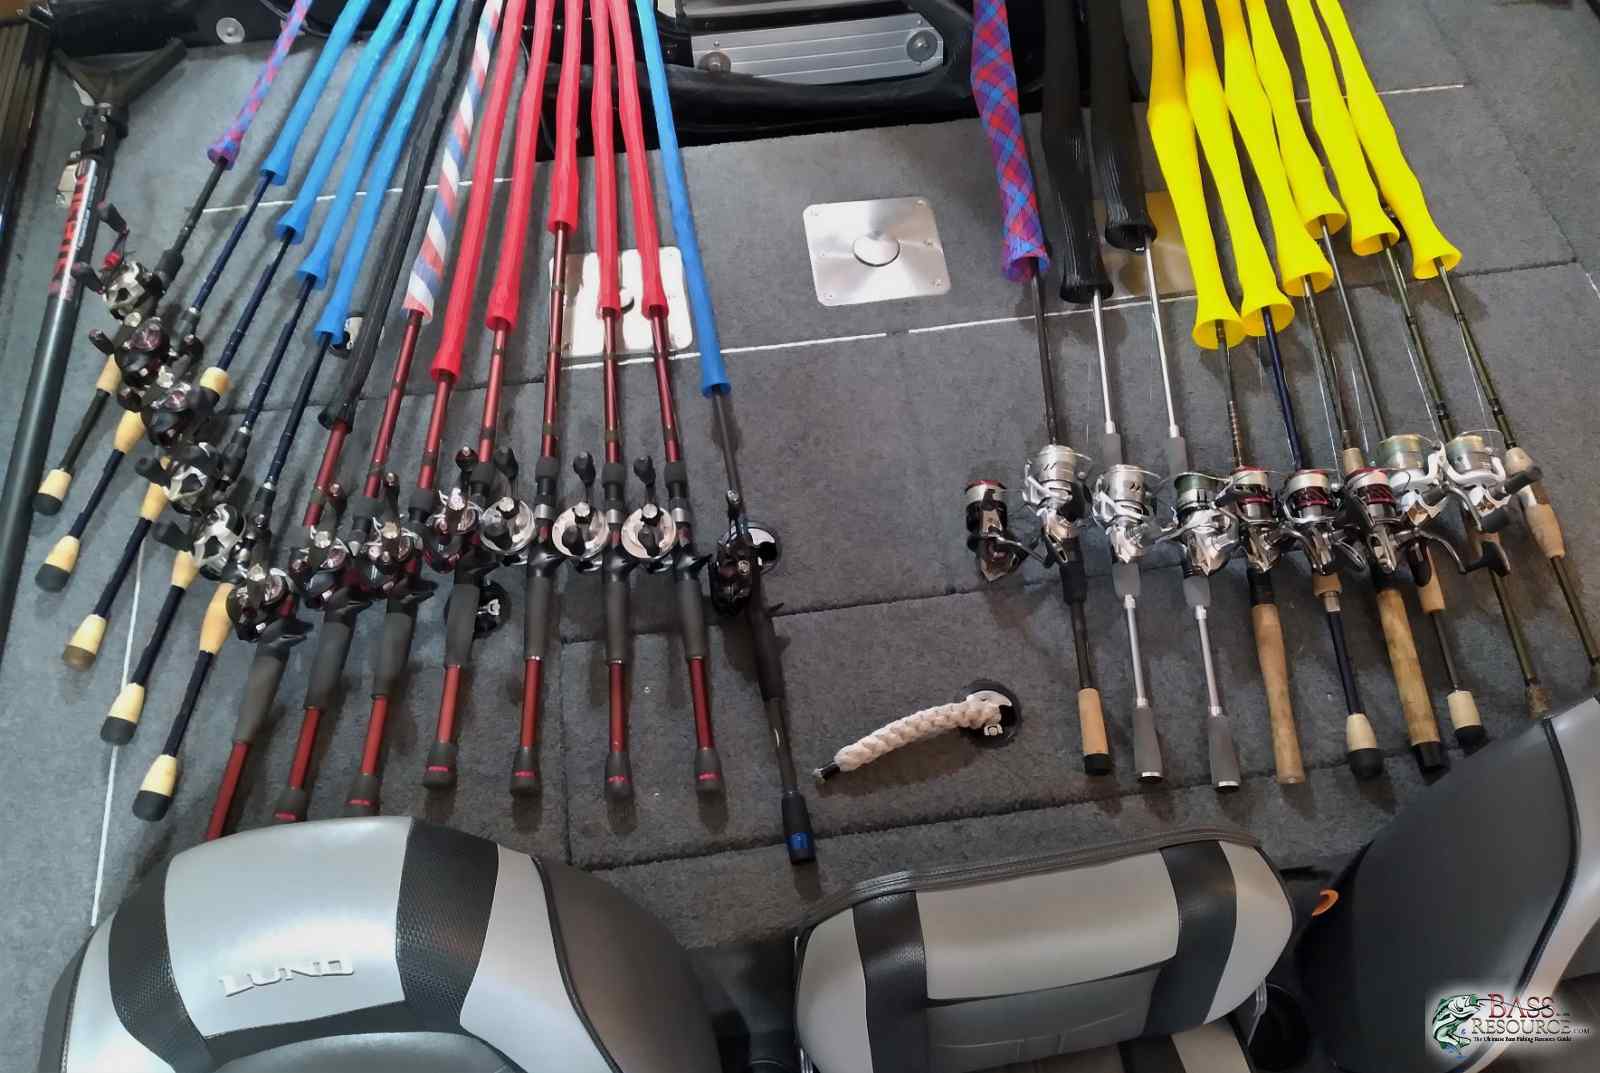 Rod selection decision - Fishing Rods, Reels, Line, and Knots